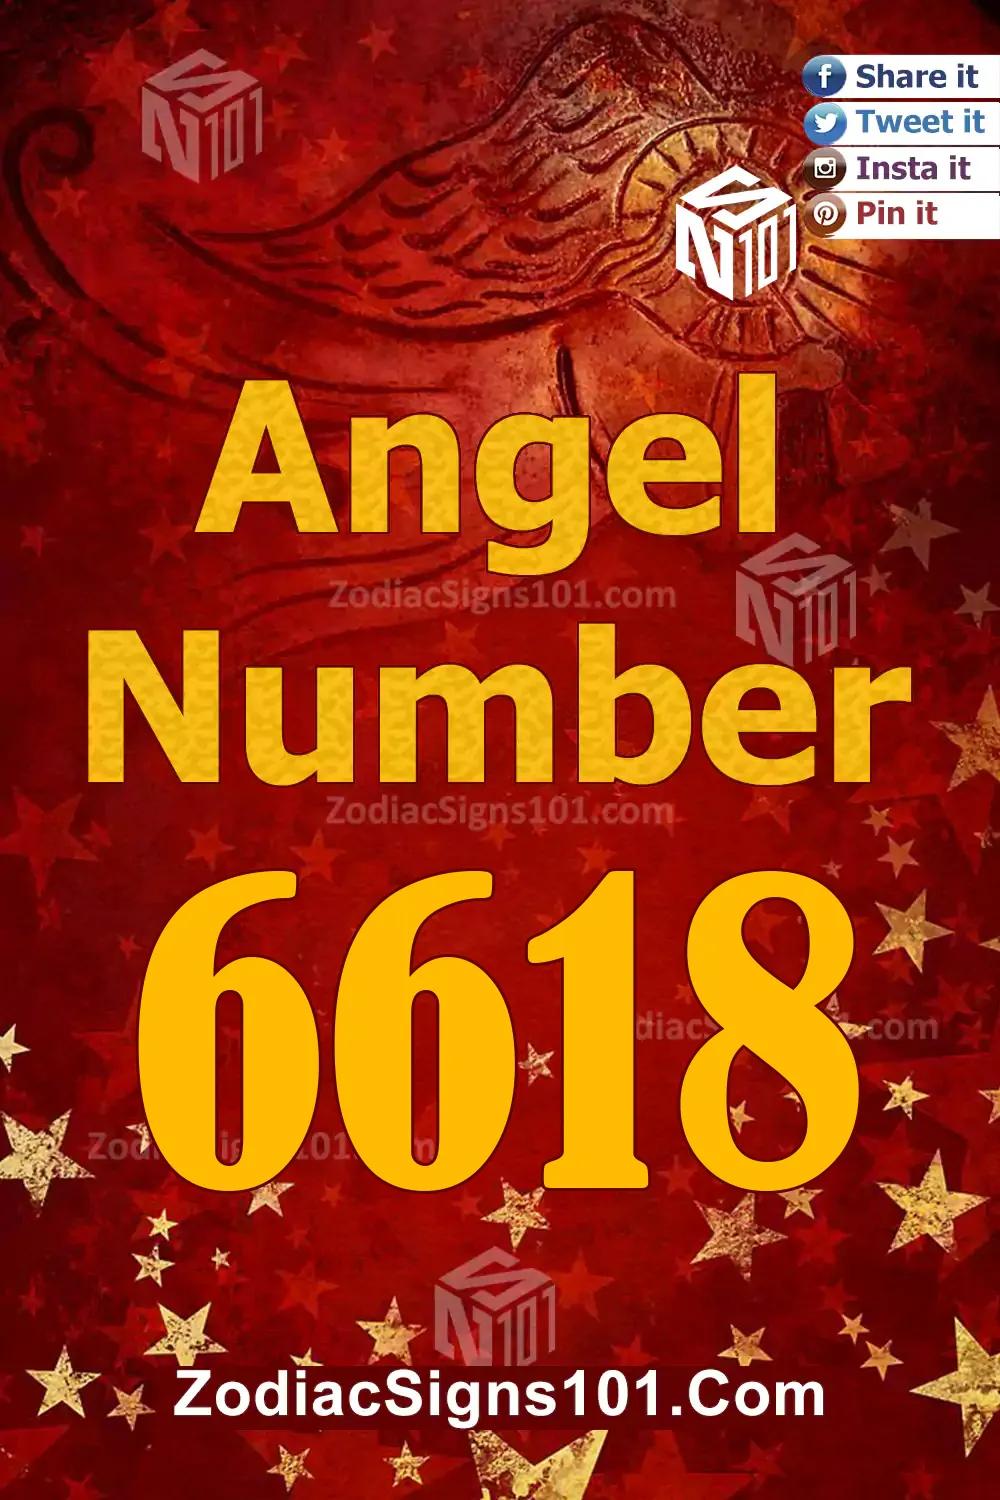 6618 Angel Number Meaning